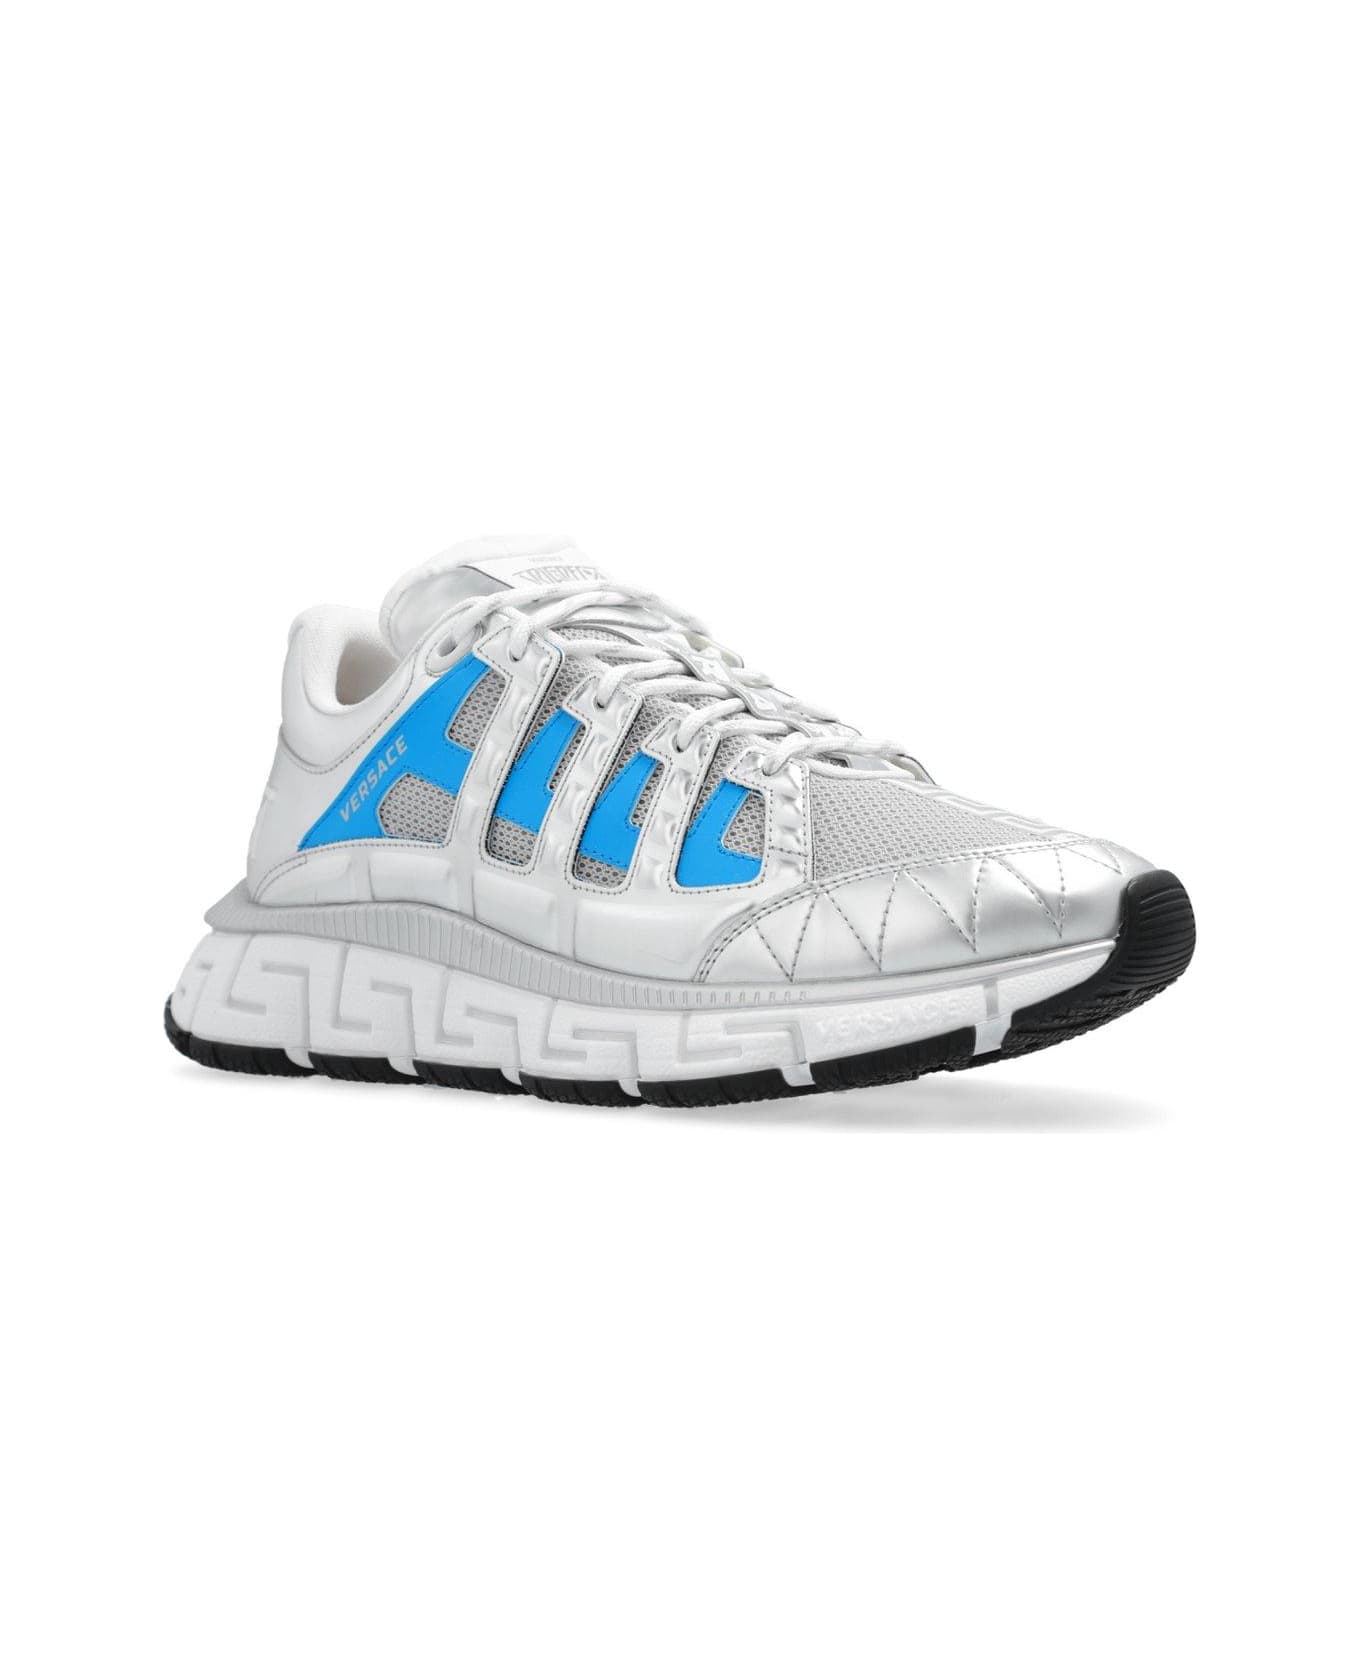 Versace Trigreca Panelled Mesh Lace-up Sneakers - Blu e Argento